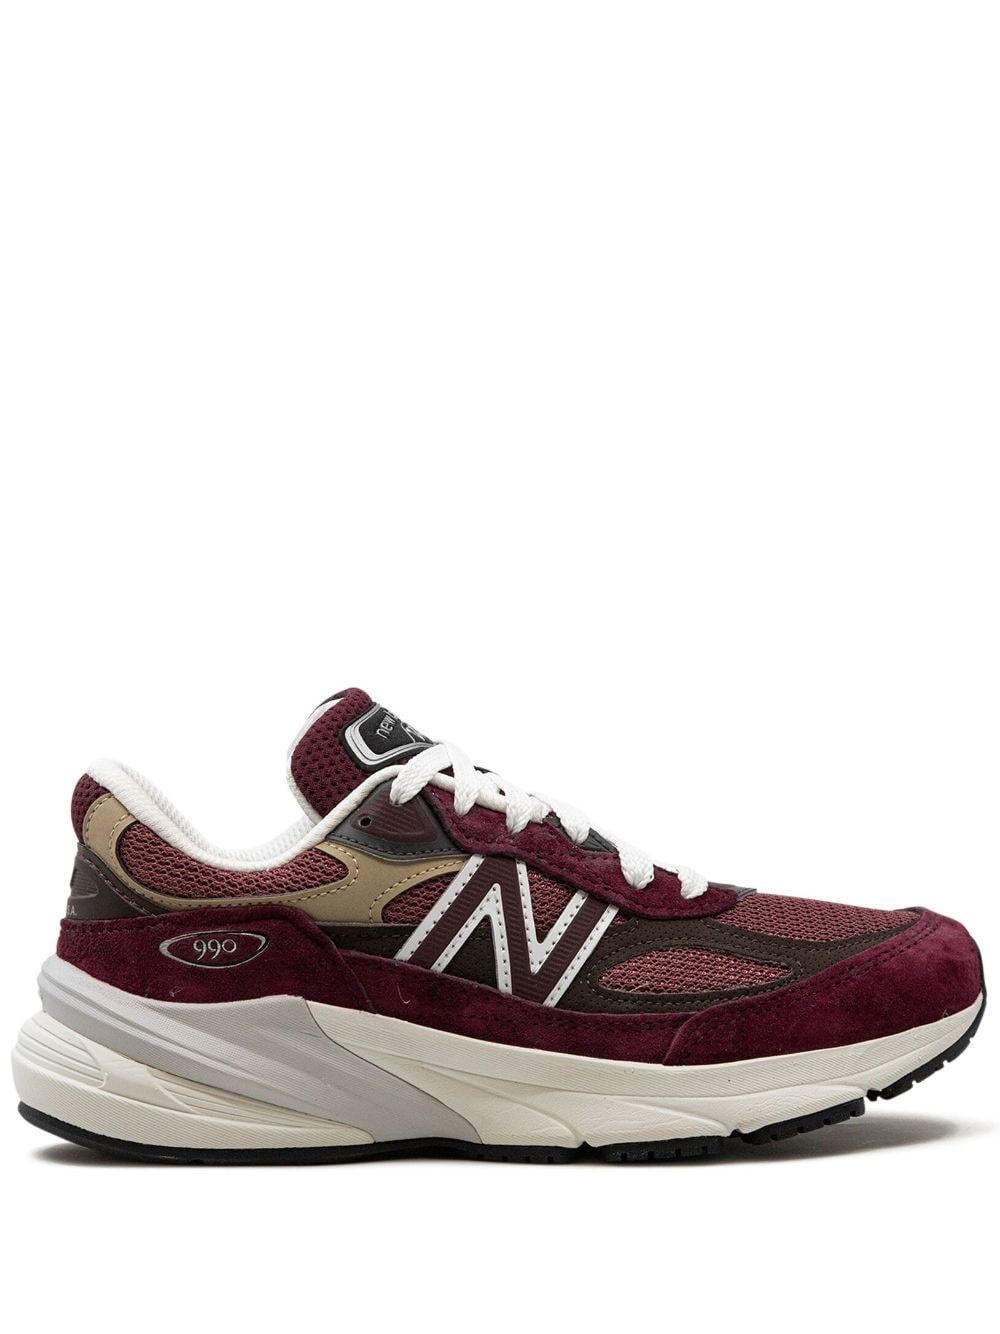 990v6 Made in USA "Burgundy" sneakers - 1